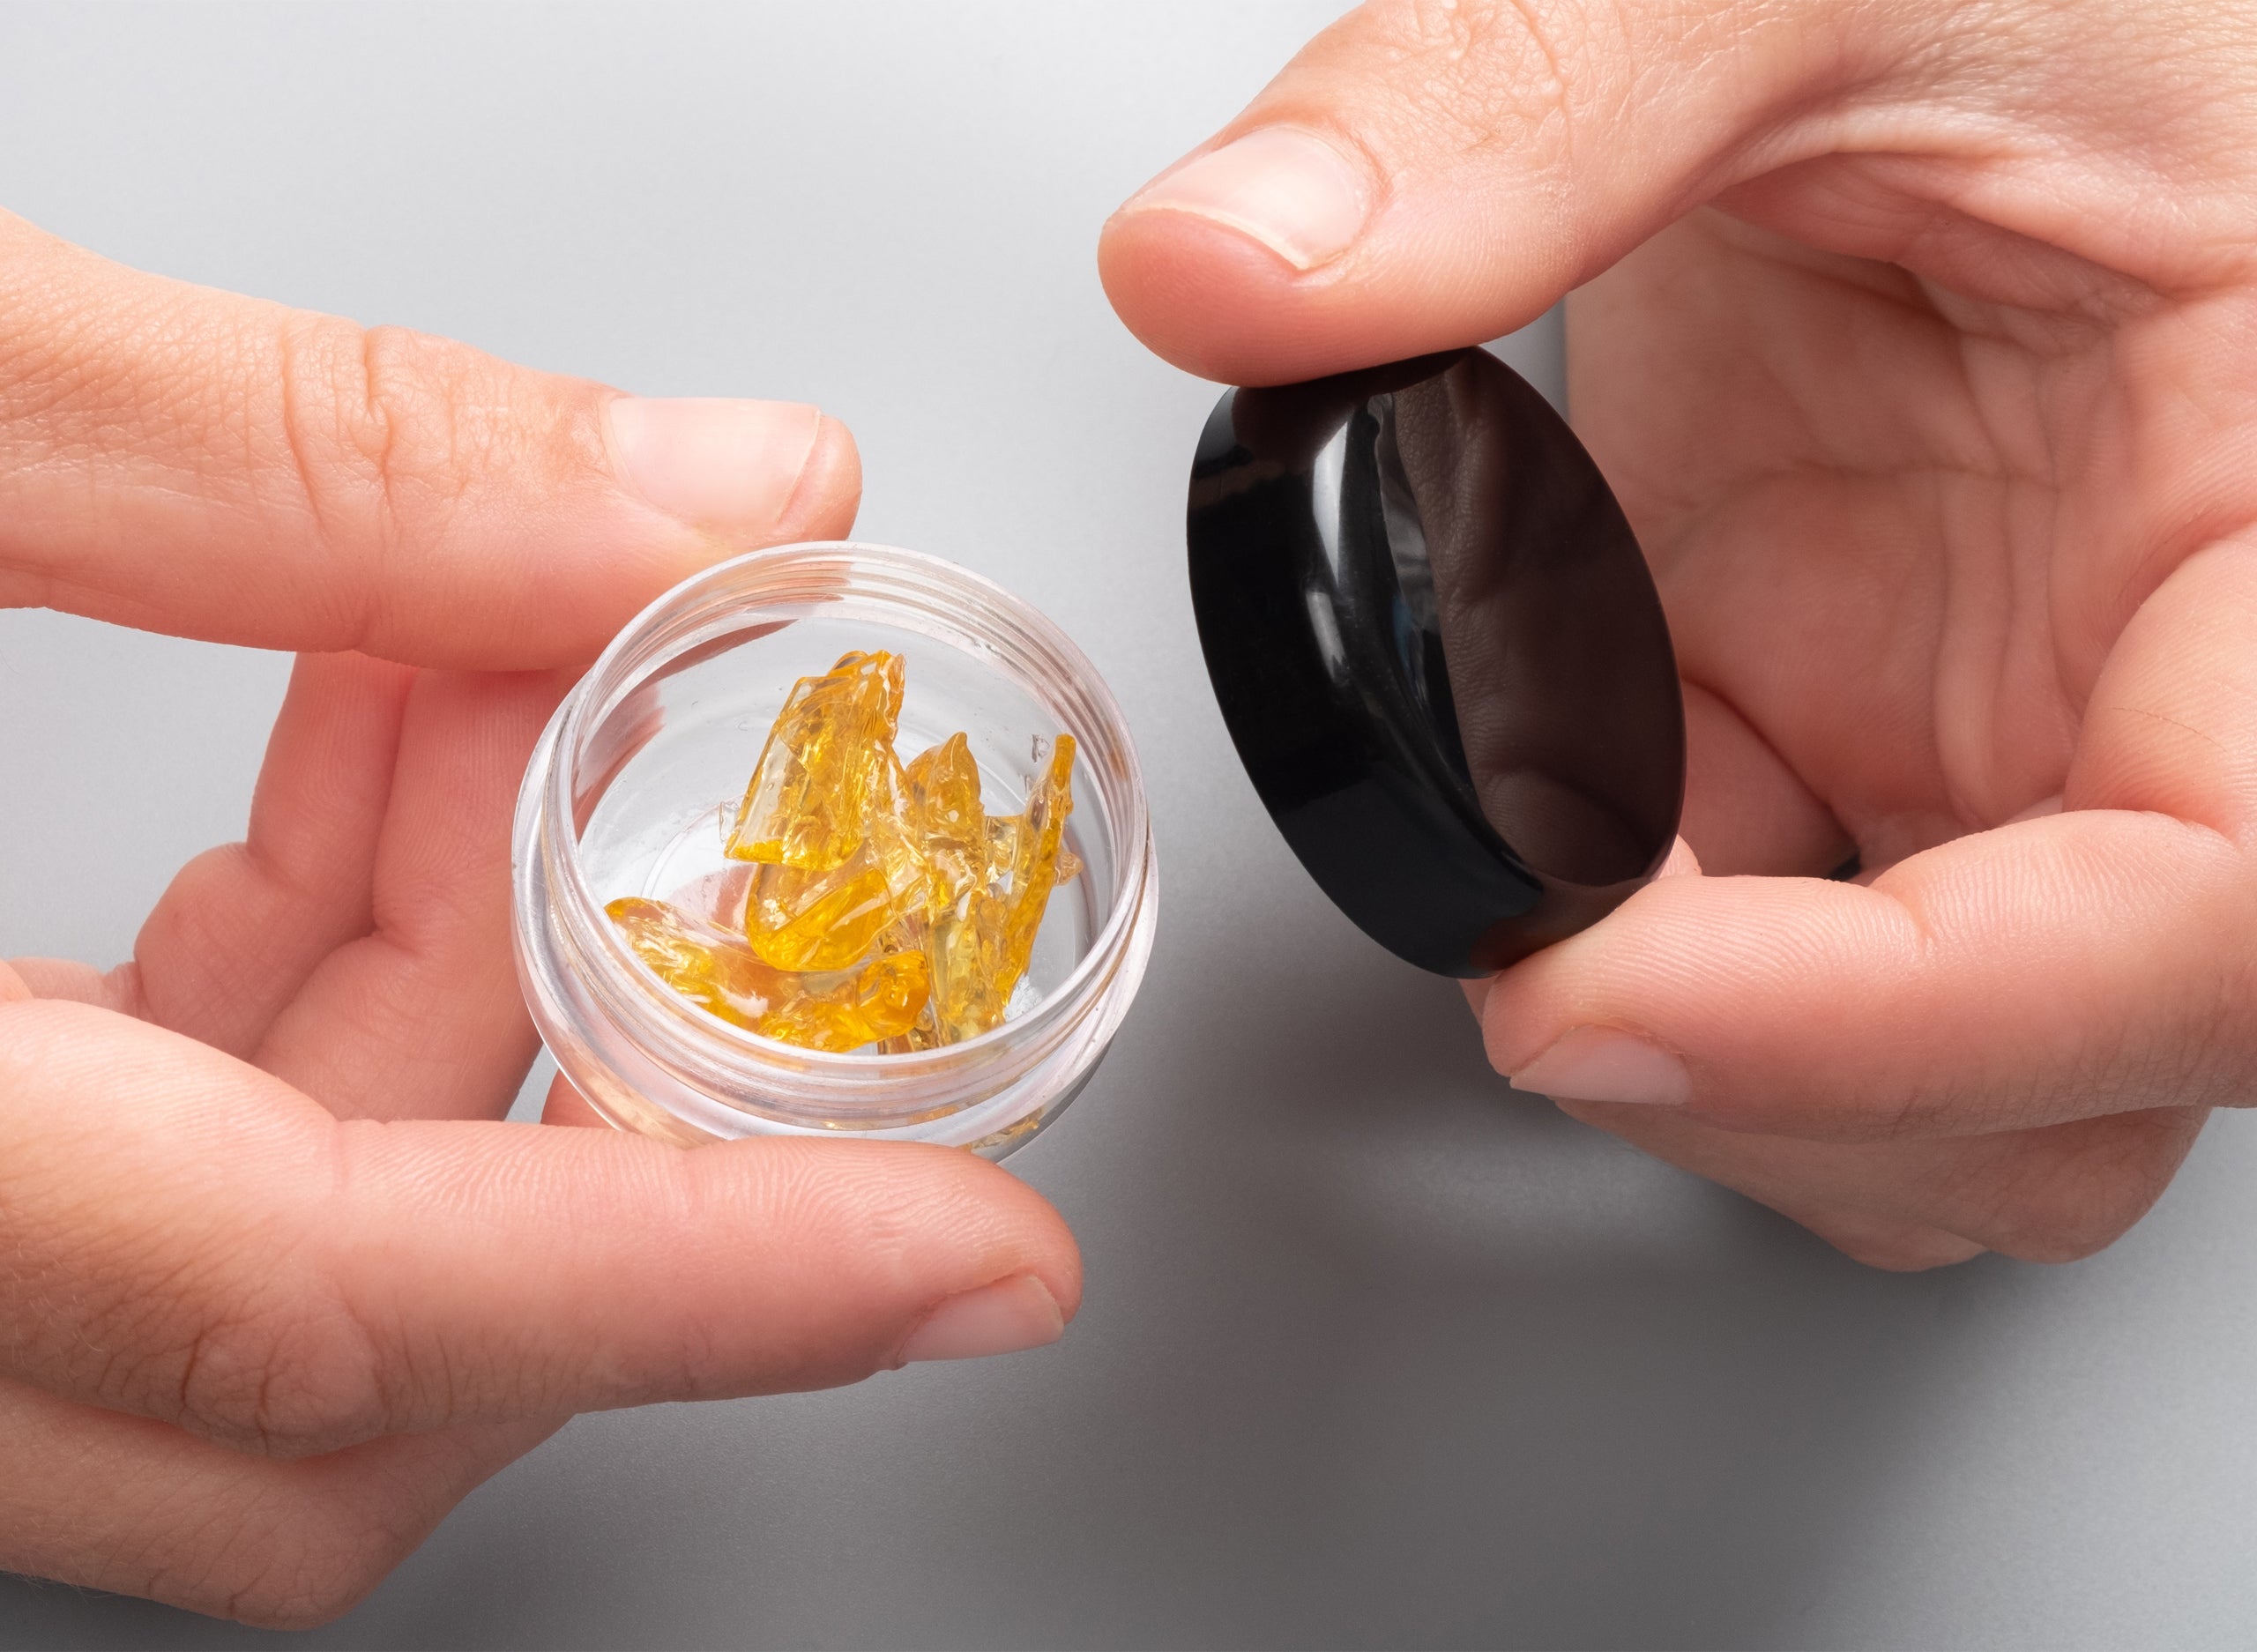 How to Properly Store Cannabis Concentrates